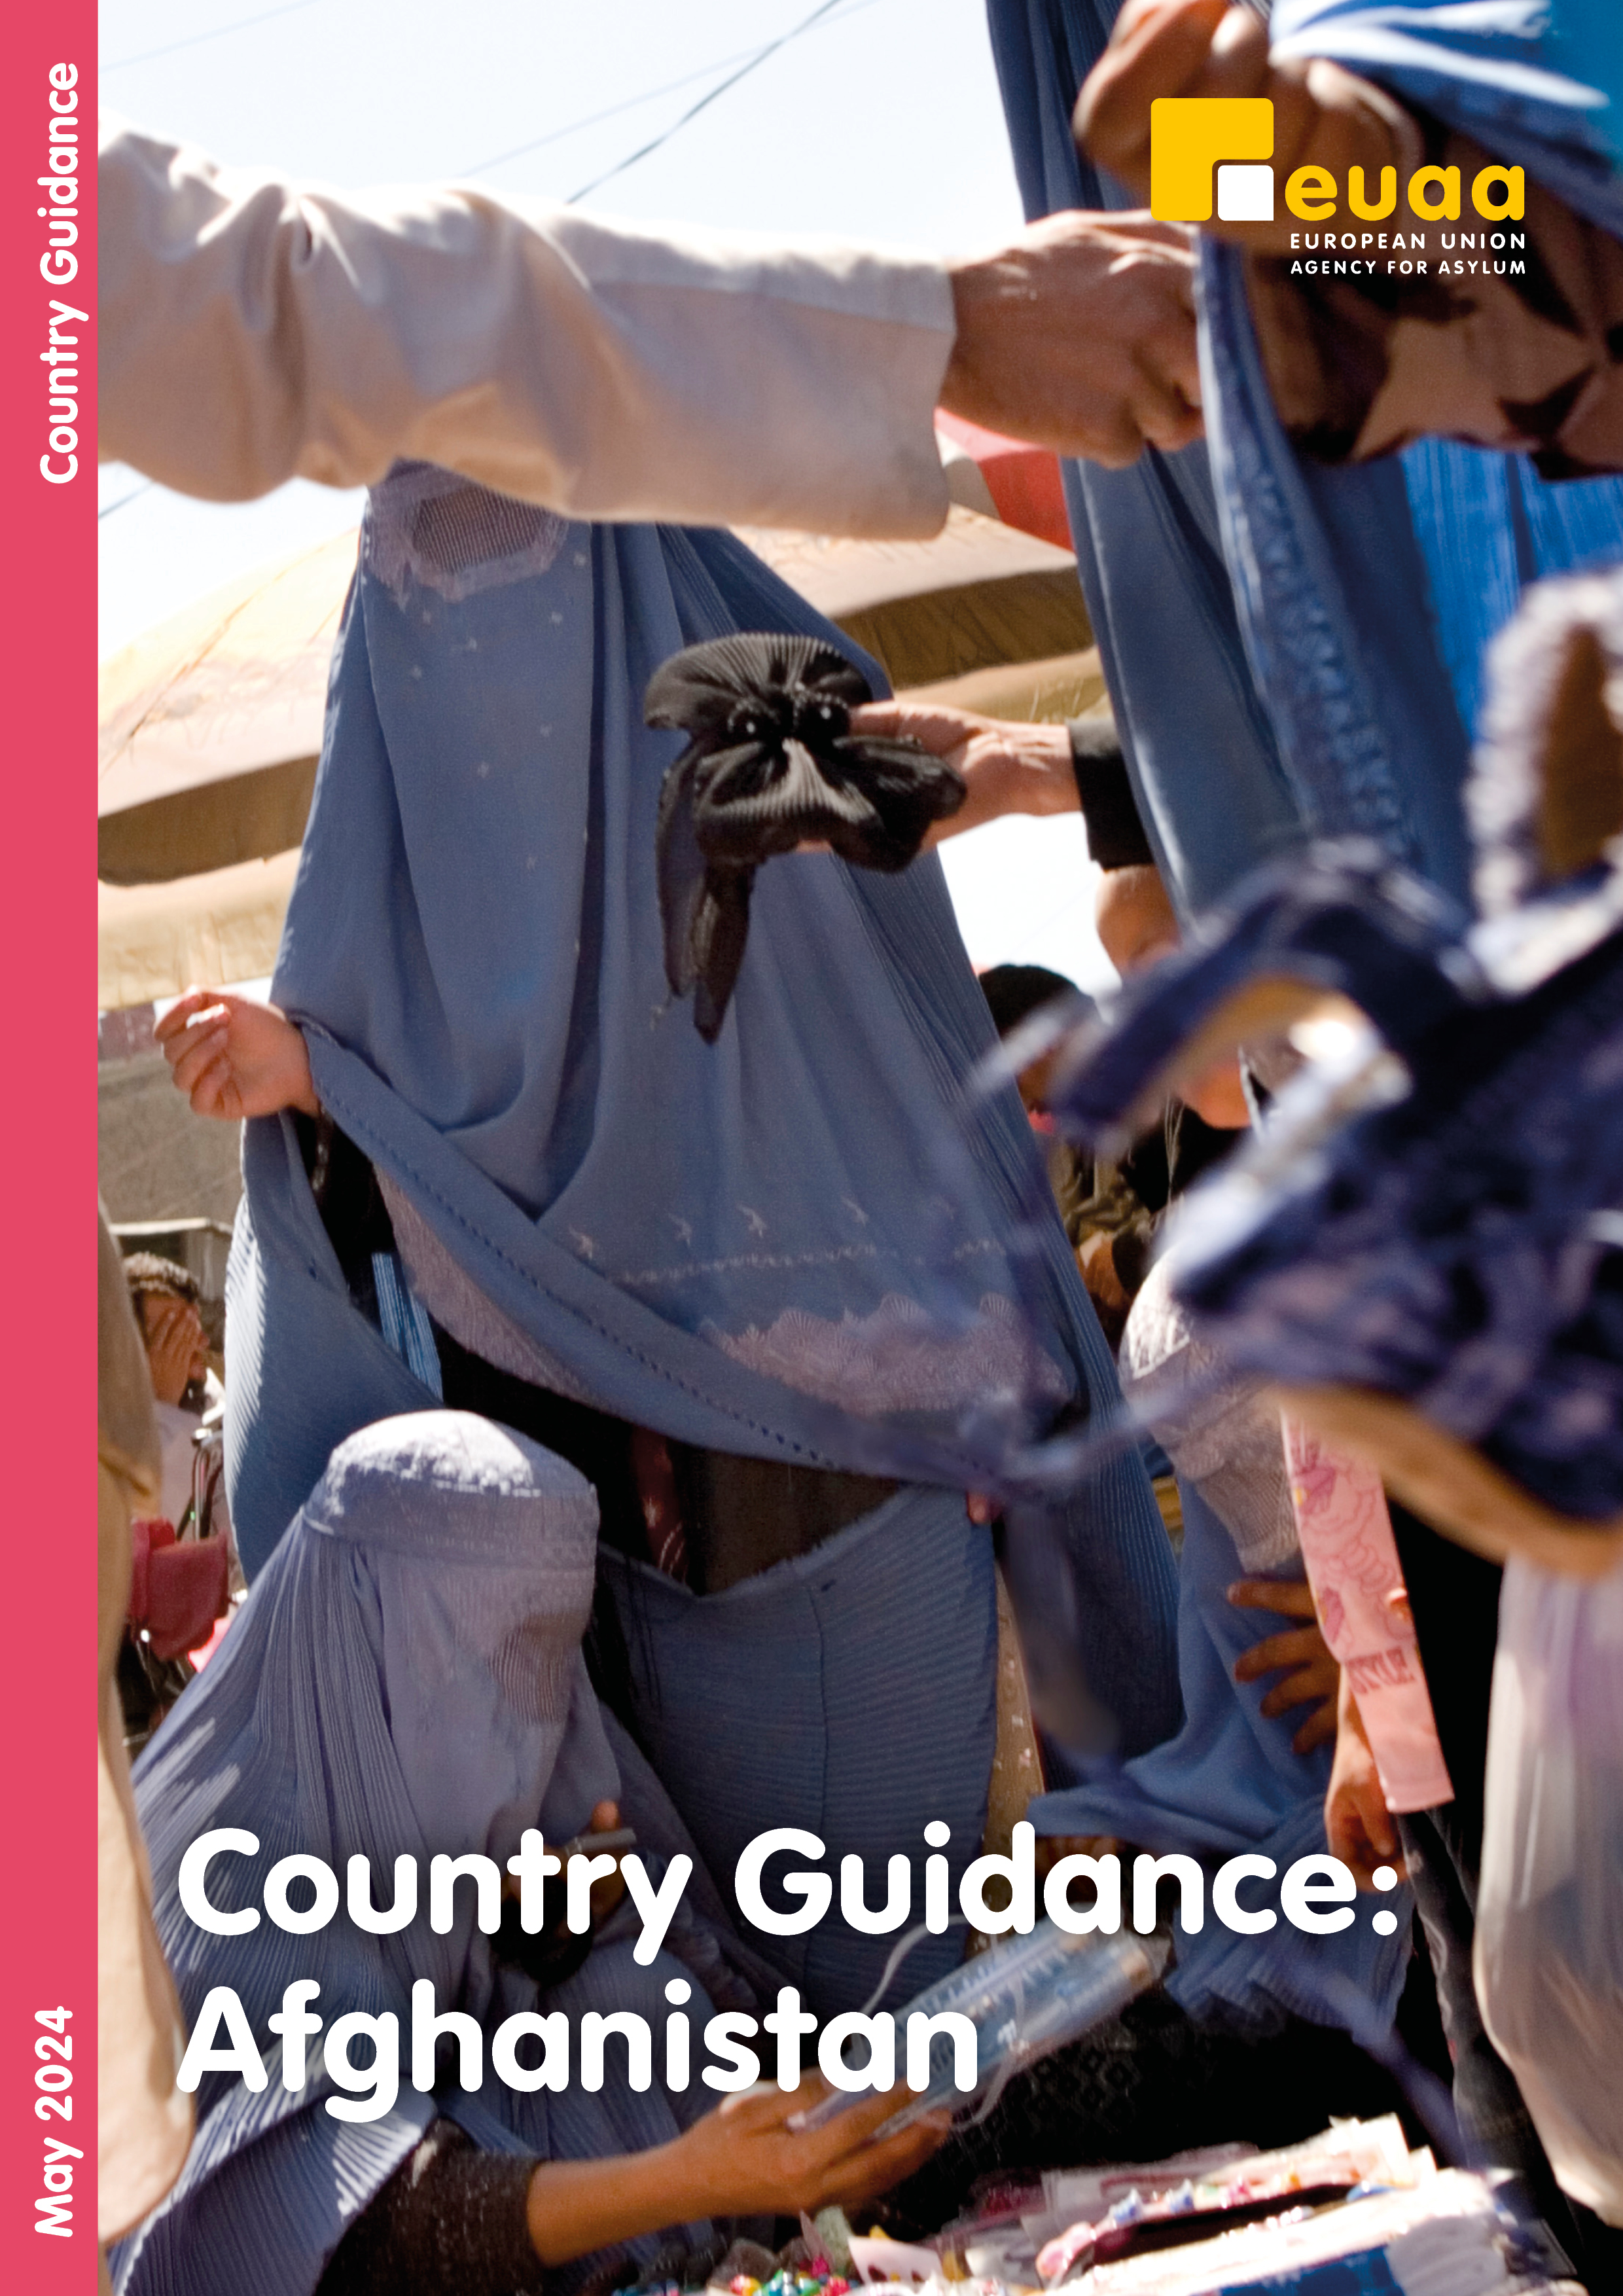 COVER_Country Guidance Afghanistan.jpg (2480×3508)